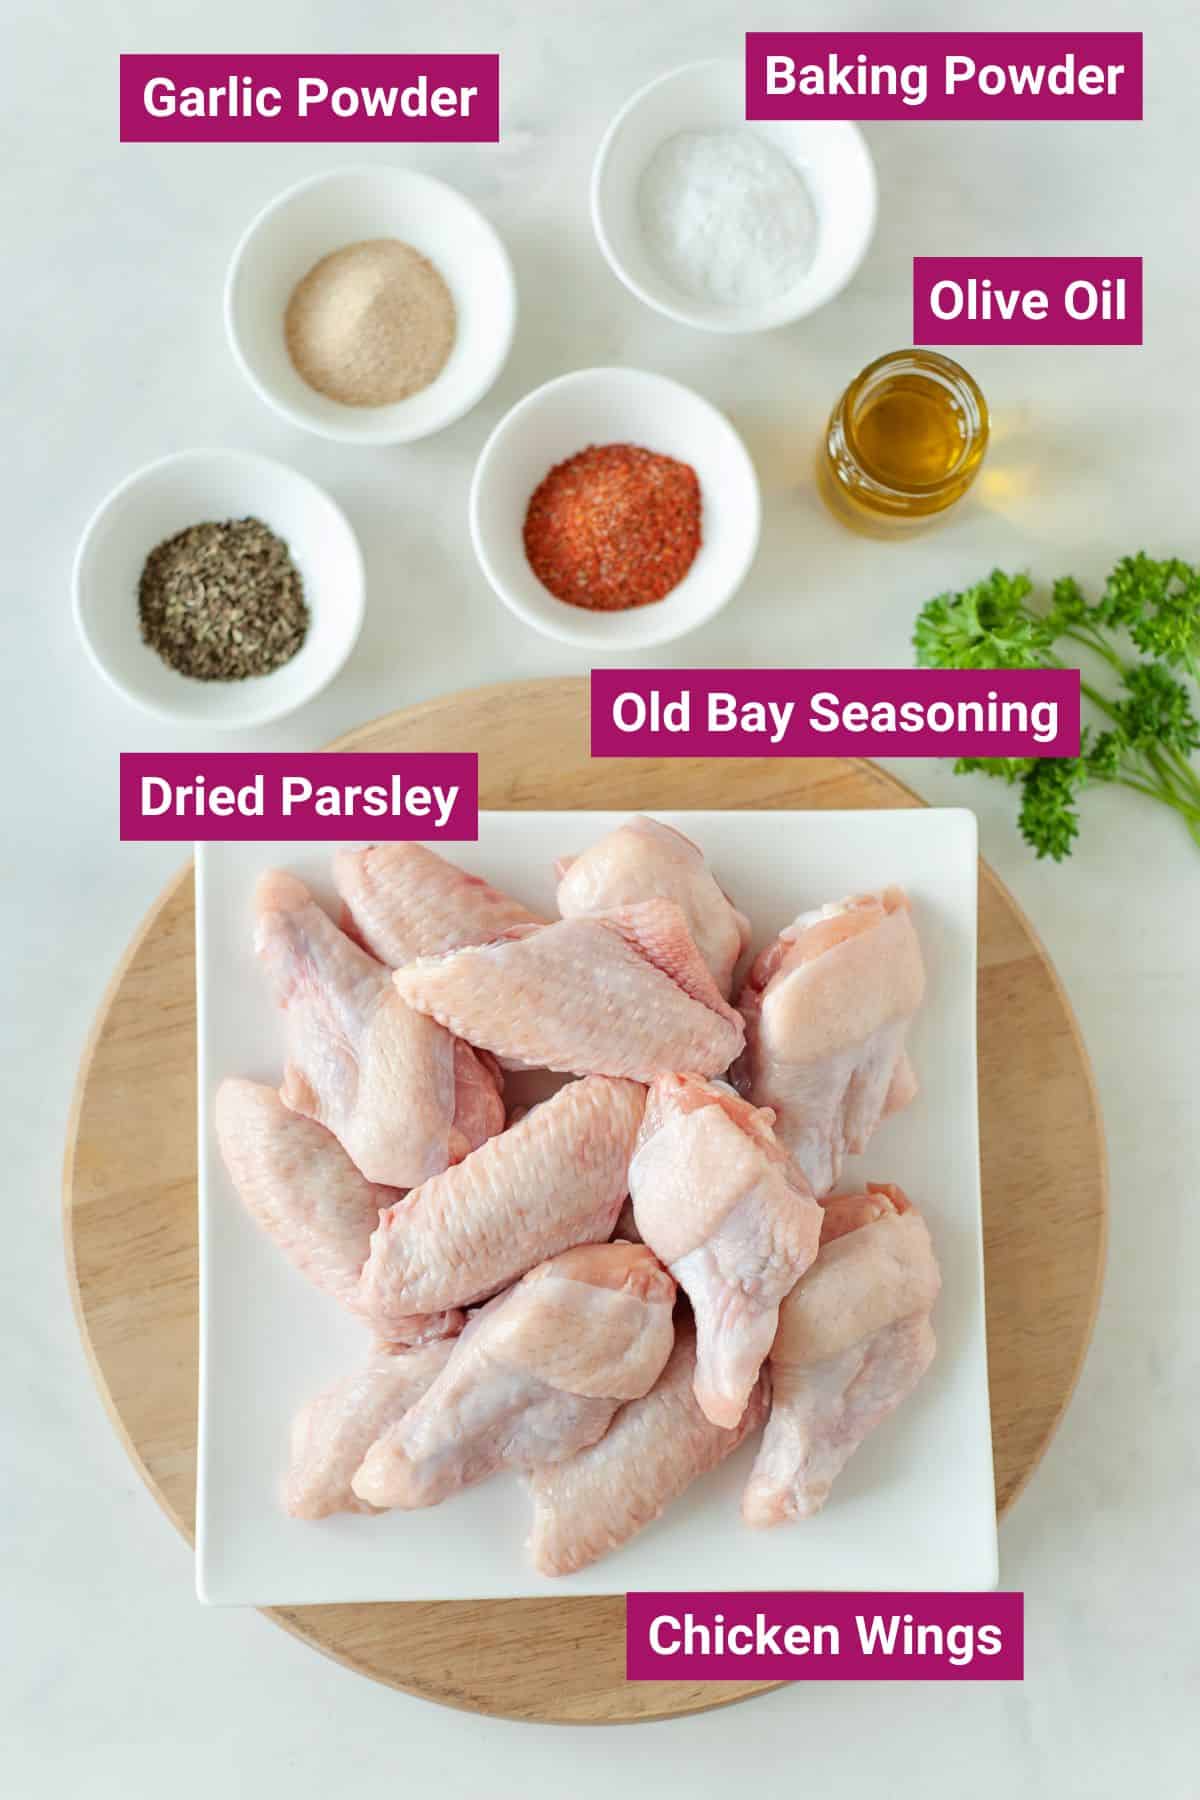 baking powder, olive oil, old bay seasoning, dried parsley, and chicken wings on separate bowls